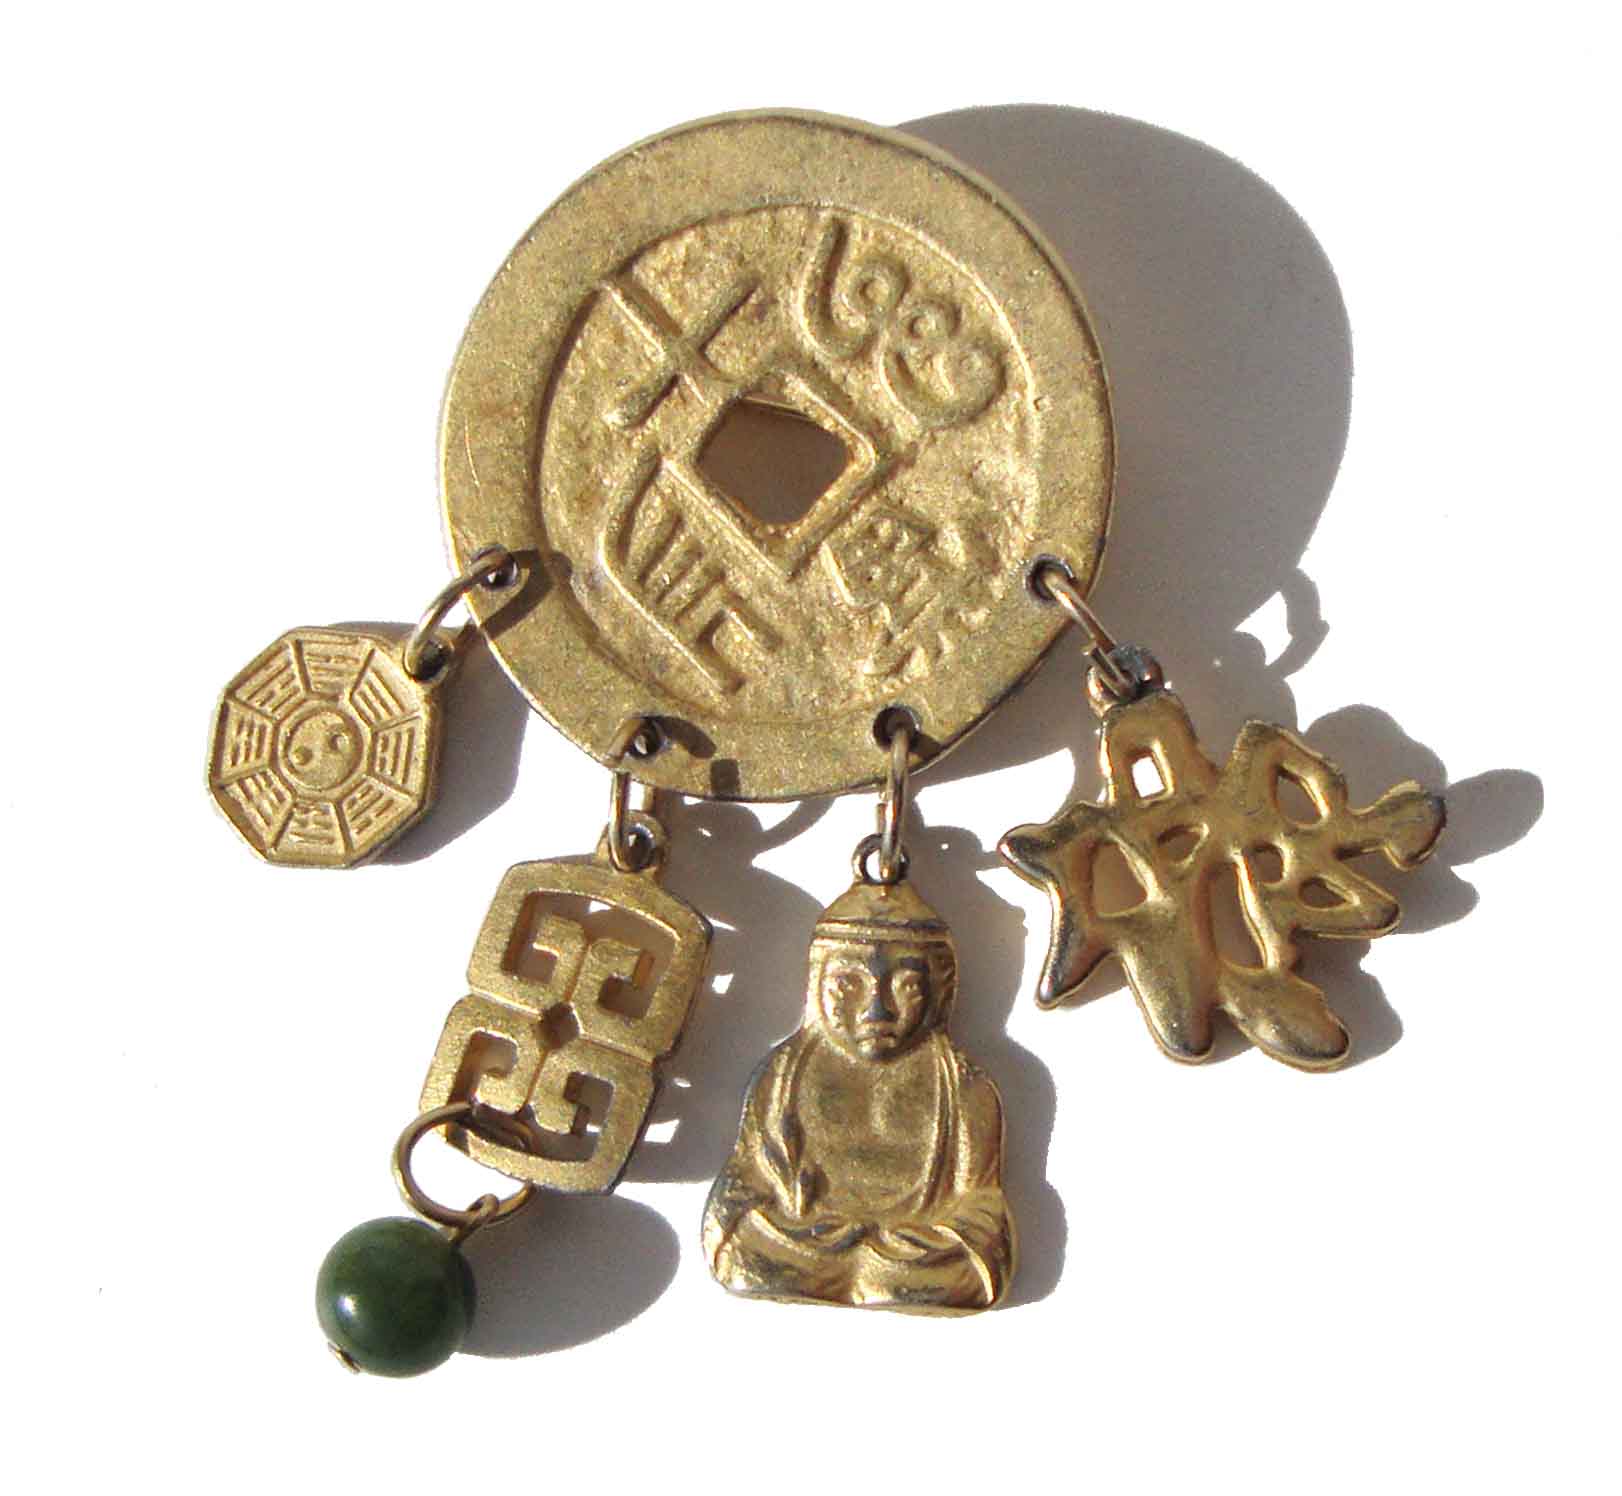 Vintage Chinese Coin Brooch w/ Good Luck Charms Pin